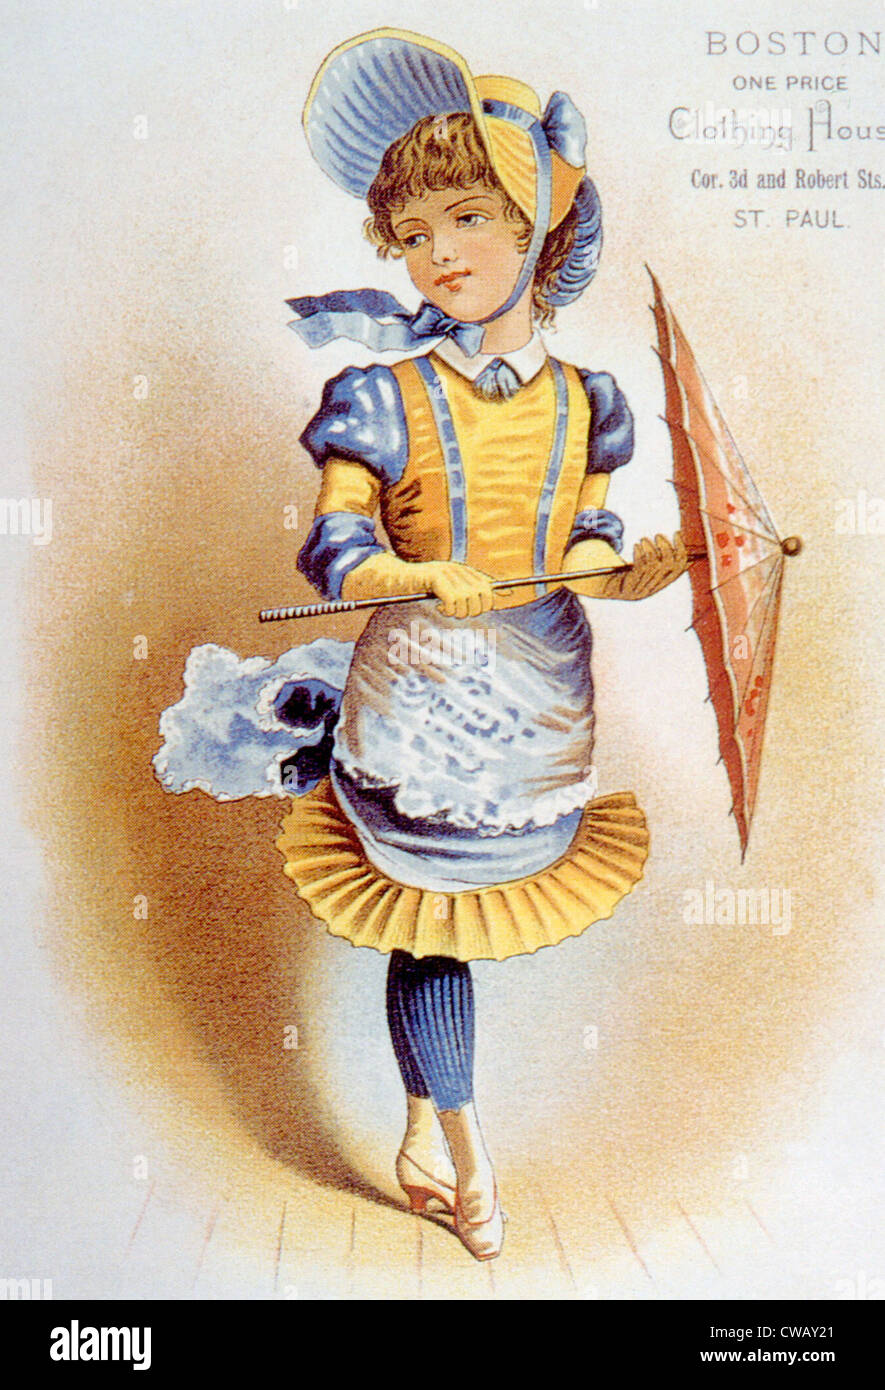 Children's fashion, circa 1890, from Boston One Price Clothing House, St. Paul. Photo: Courtesy Everett Collection Stock Photo